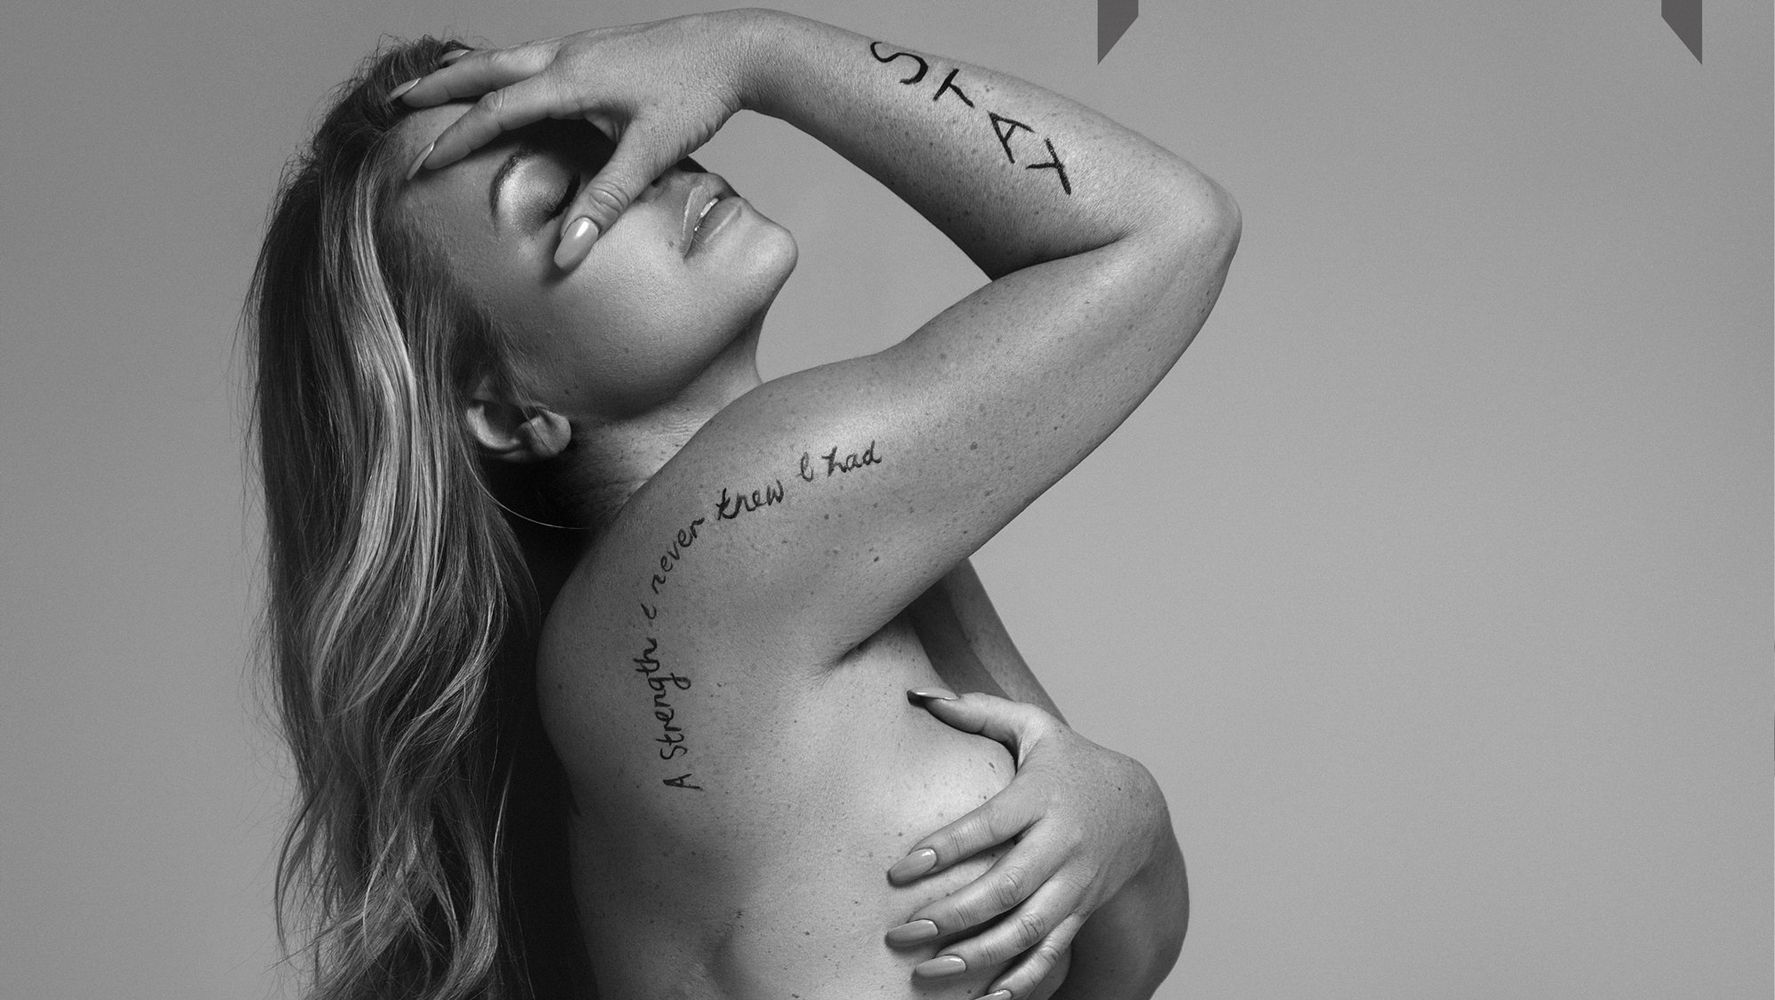 Anastacia Proudly Reveals Breast Cancer Scars In Empowering Nude Photoshoot  | HuffPost UK Life